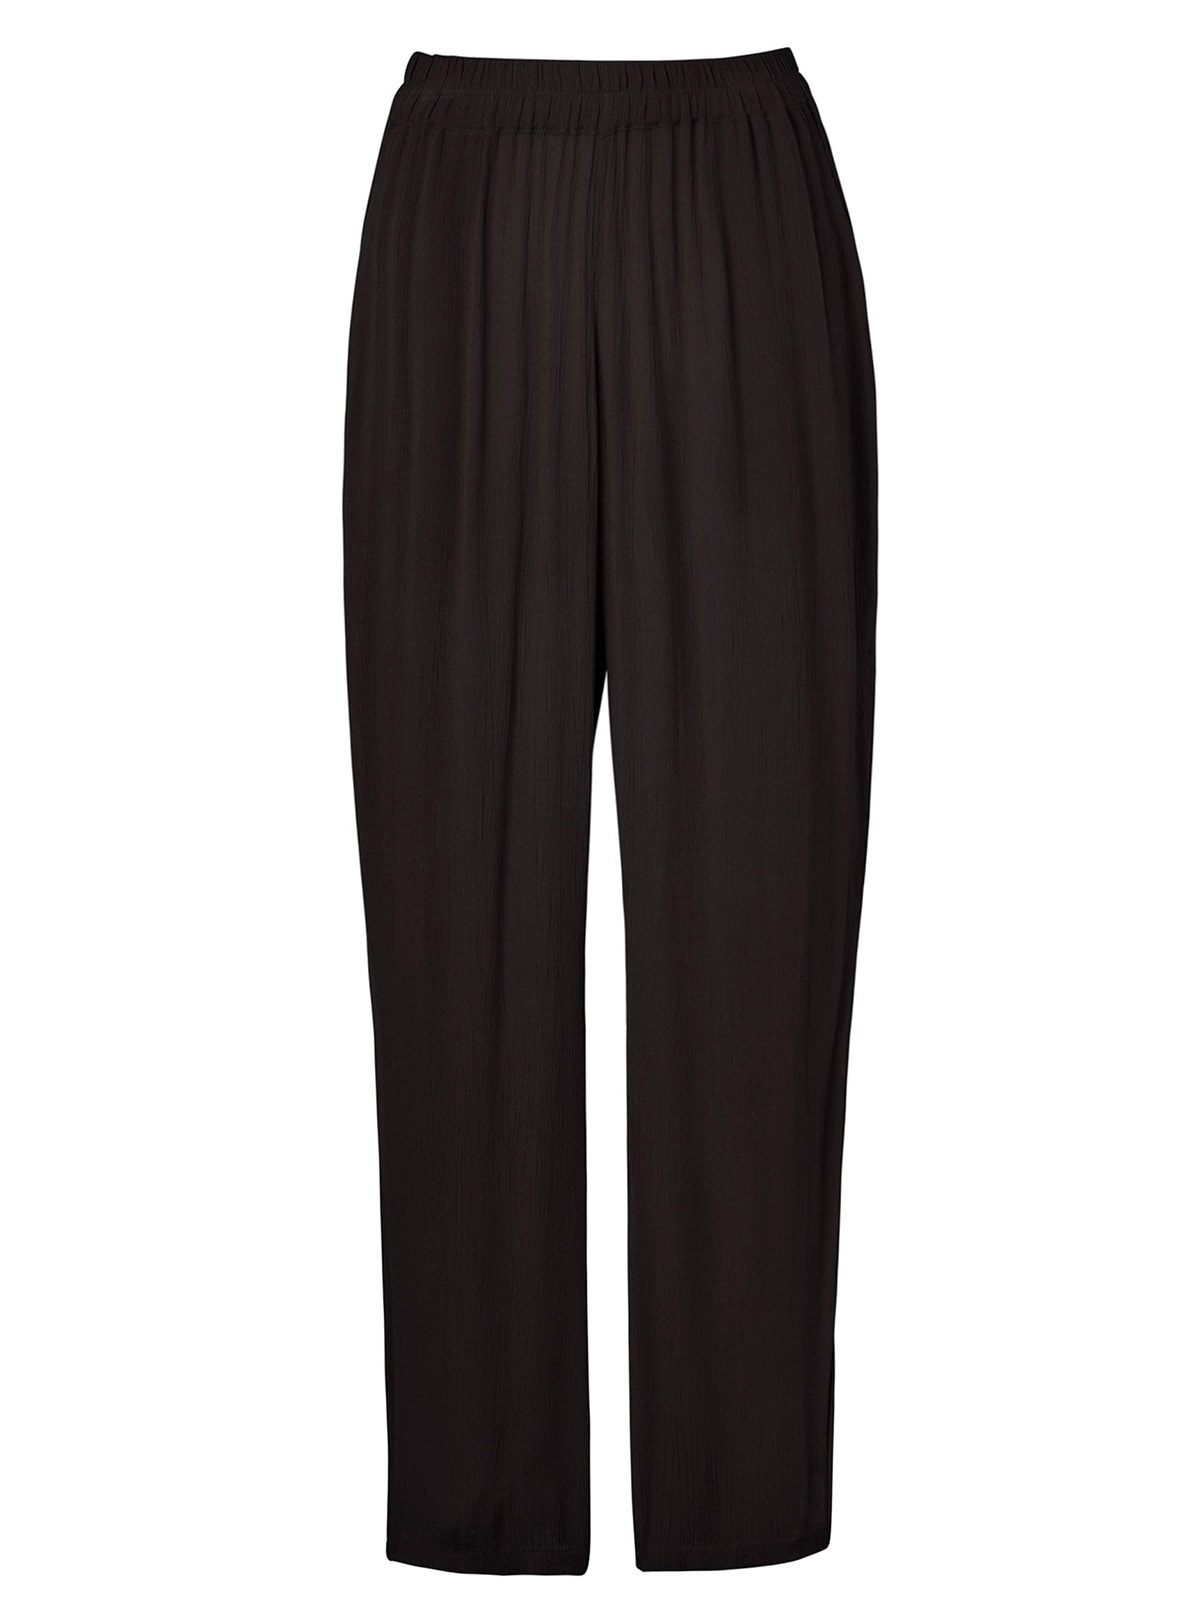 Cotton Tr4ders BLACK Crinkle Trousers - Plus Size 18 to 26